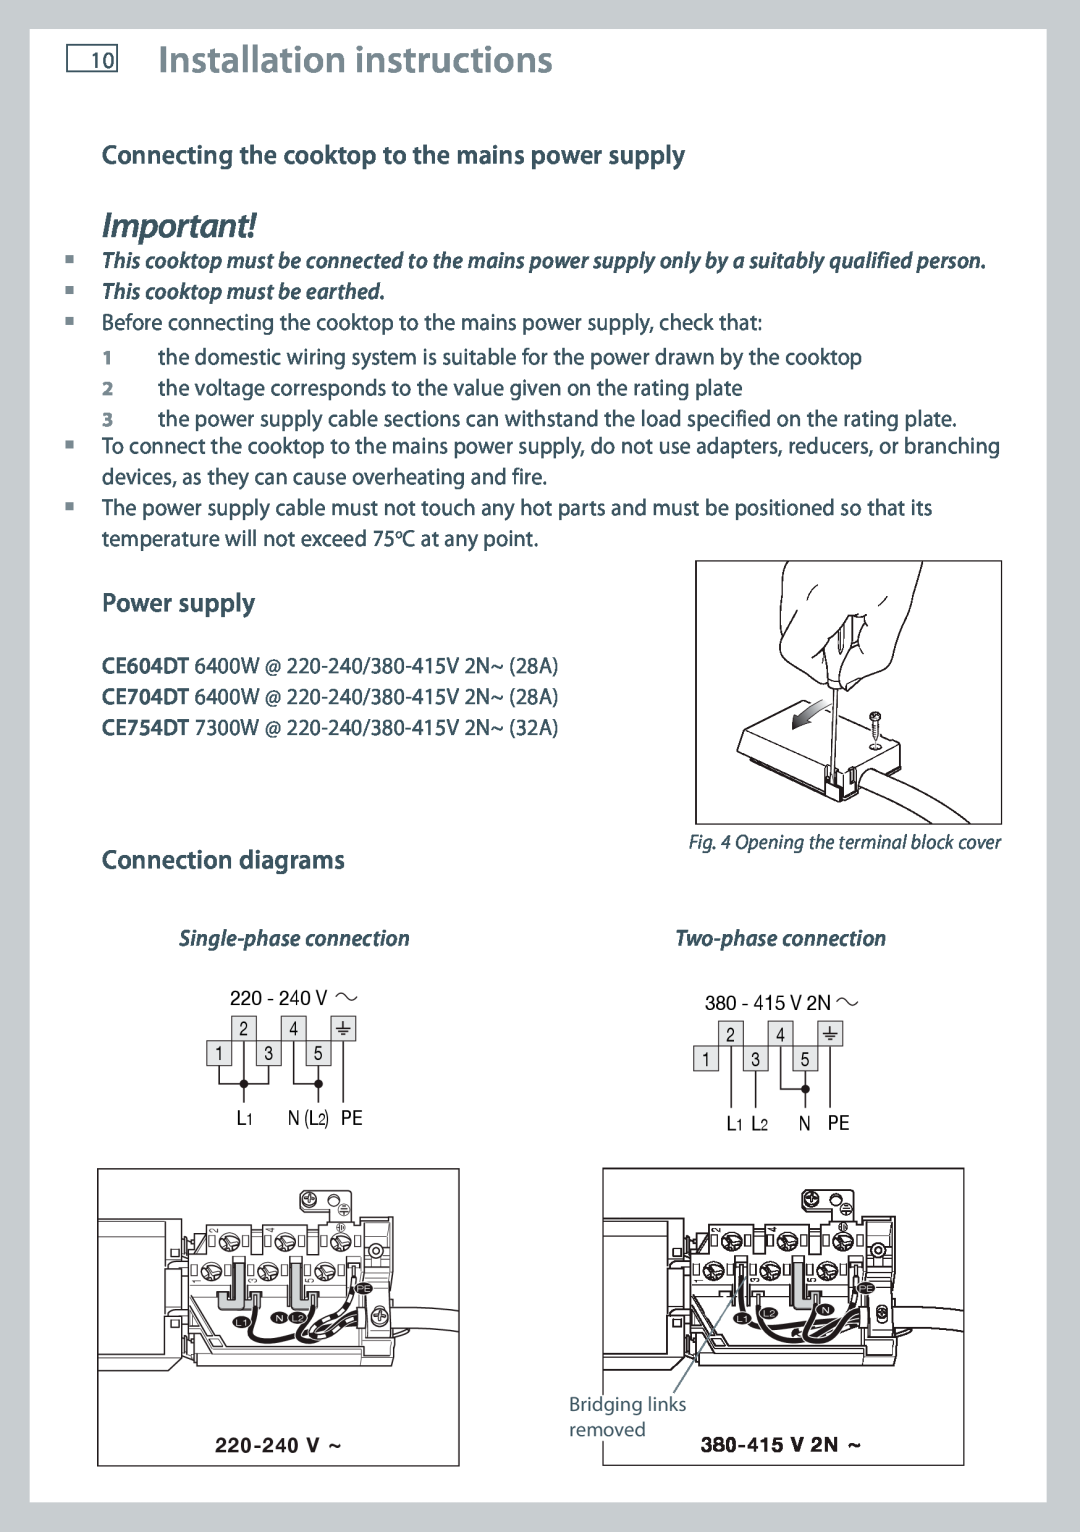 Fisher & Paykel CE604DT, CE704DT Connecting the cooktop to the mains power supply, Power supply, Connection diagrams 